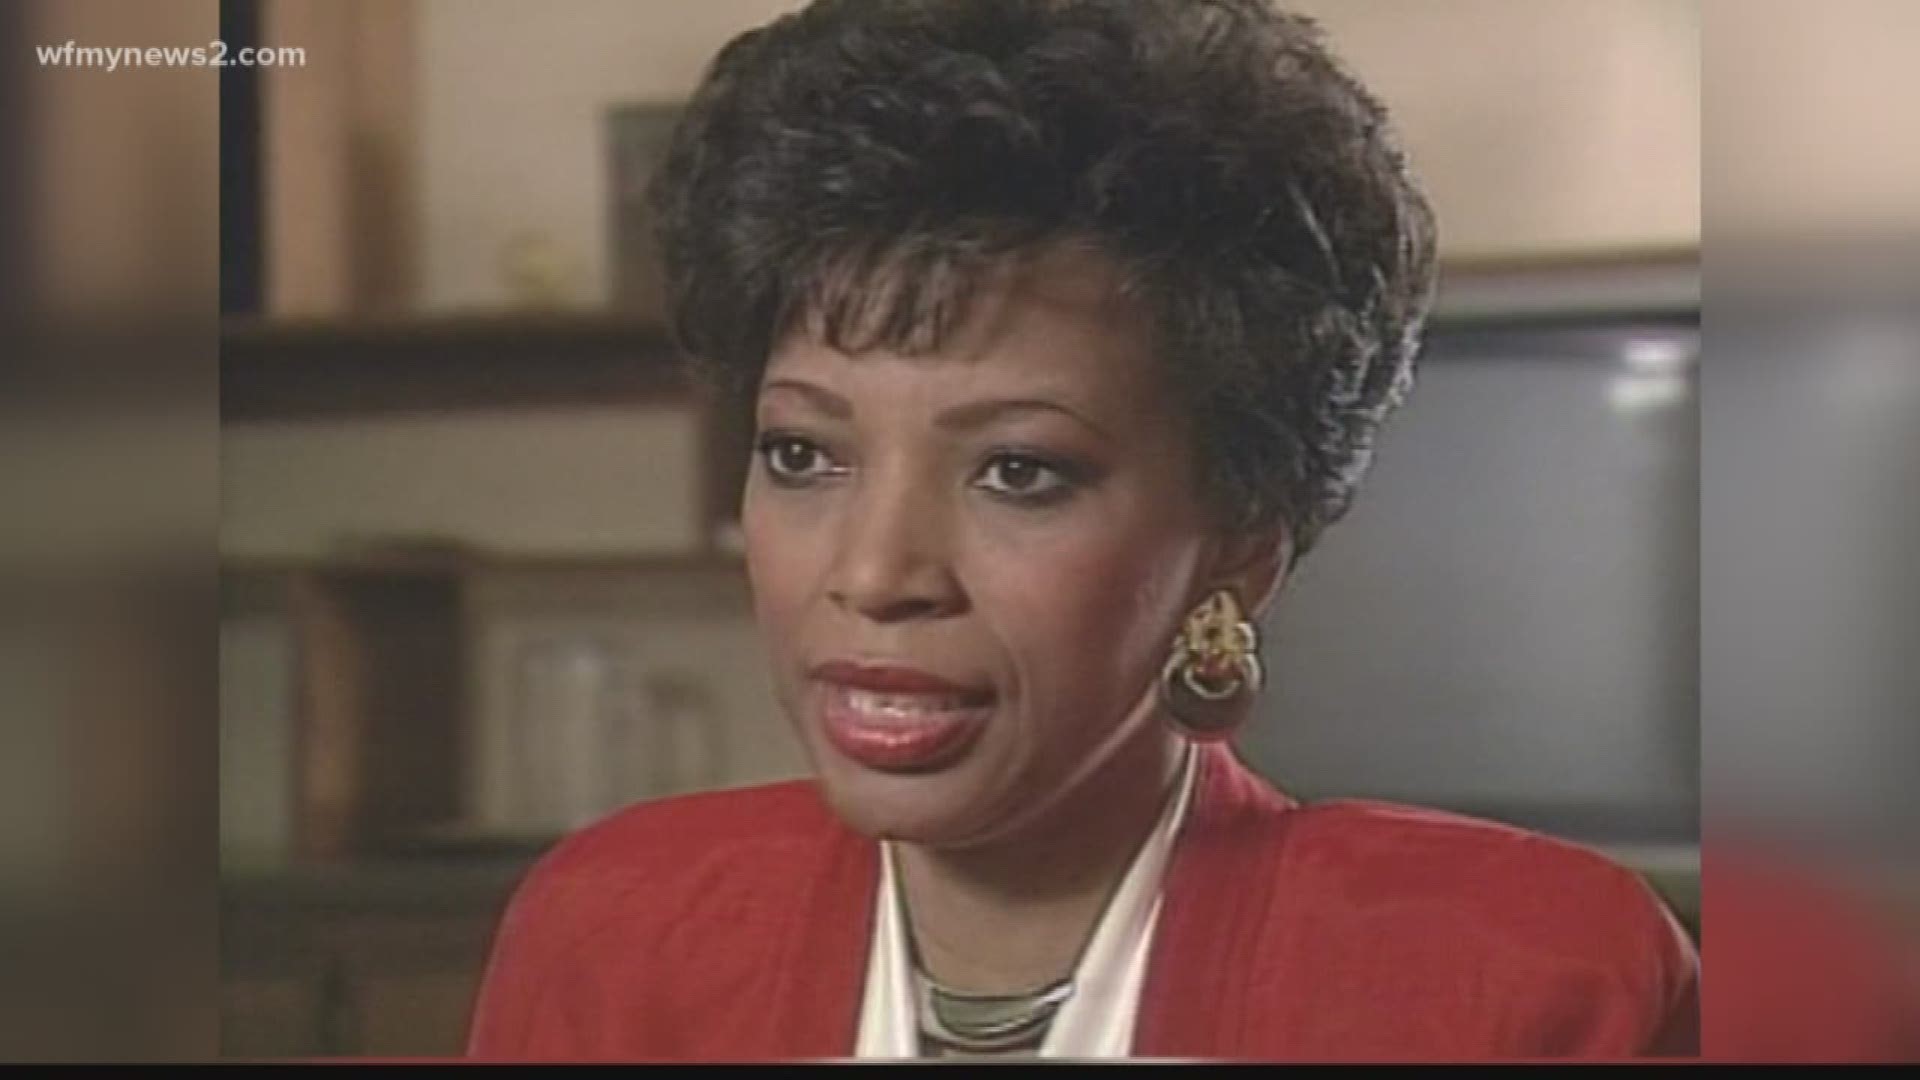 As we celebrate 70 years this year, we’re looking back at when Sandra Hughes started at News 2.